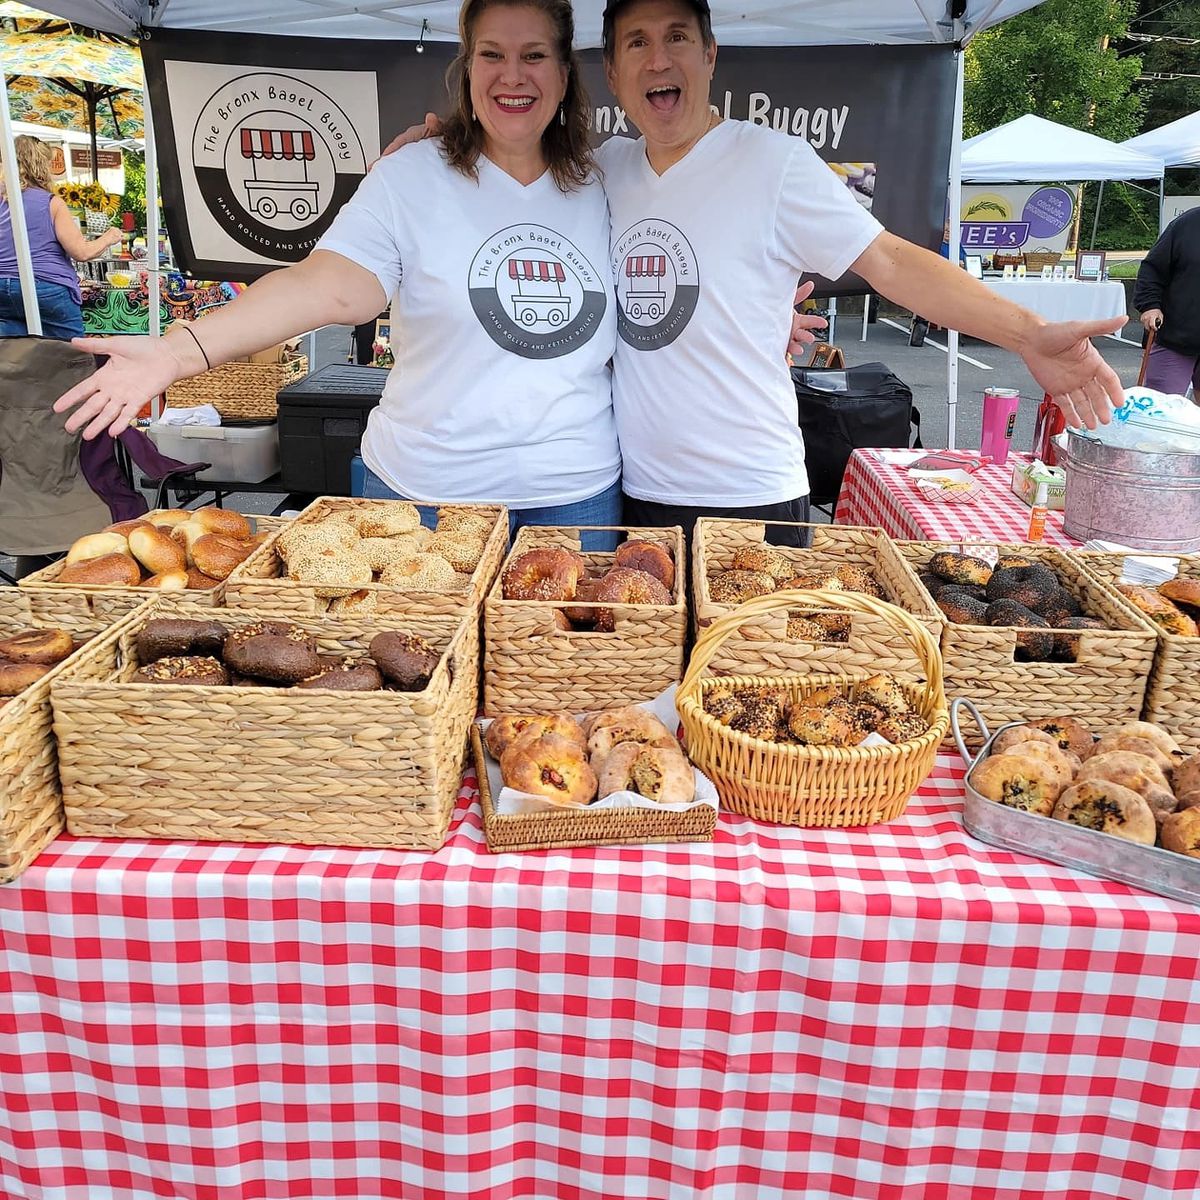 Julie Dragich and Steven Novotny in front of their table filled with bagels from the Bronx Bagel Buggy at the Brookhaven Farmers Market in Georgia.